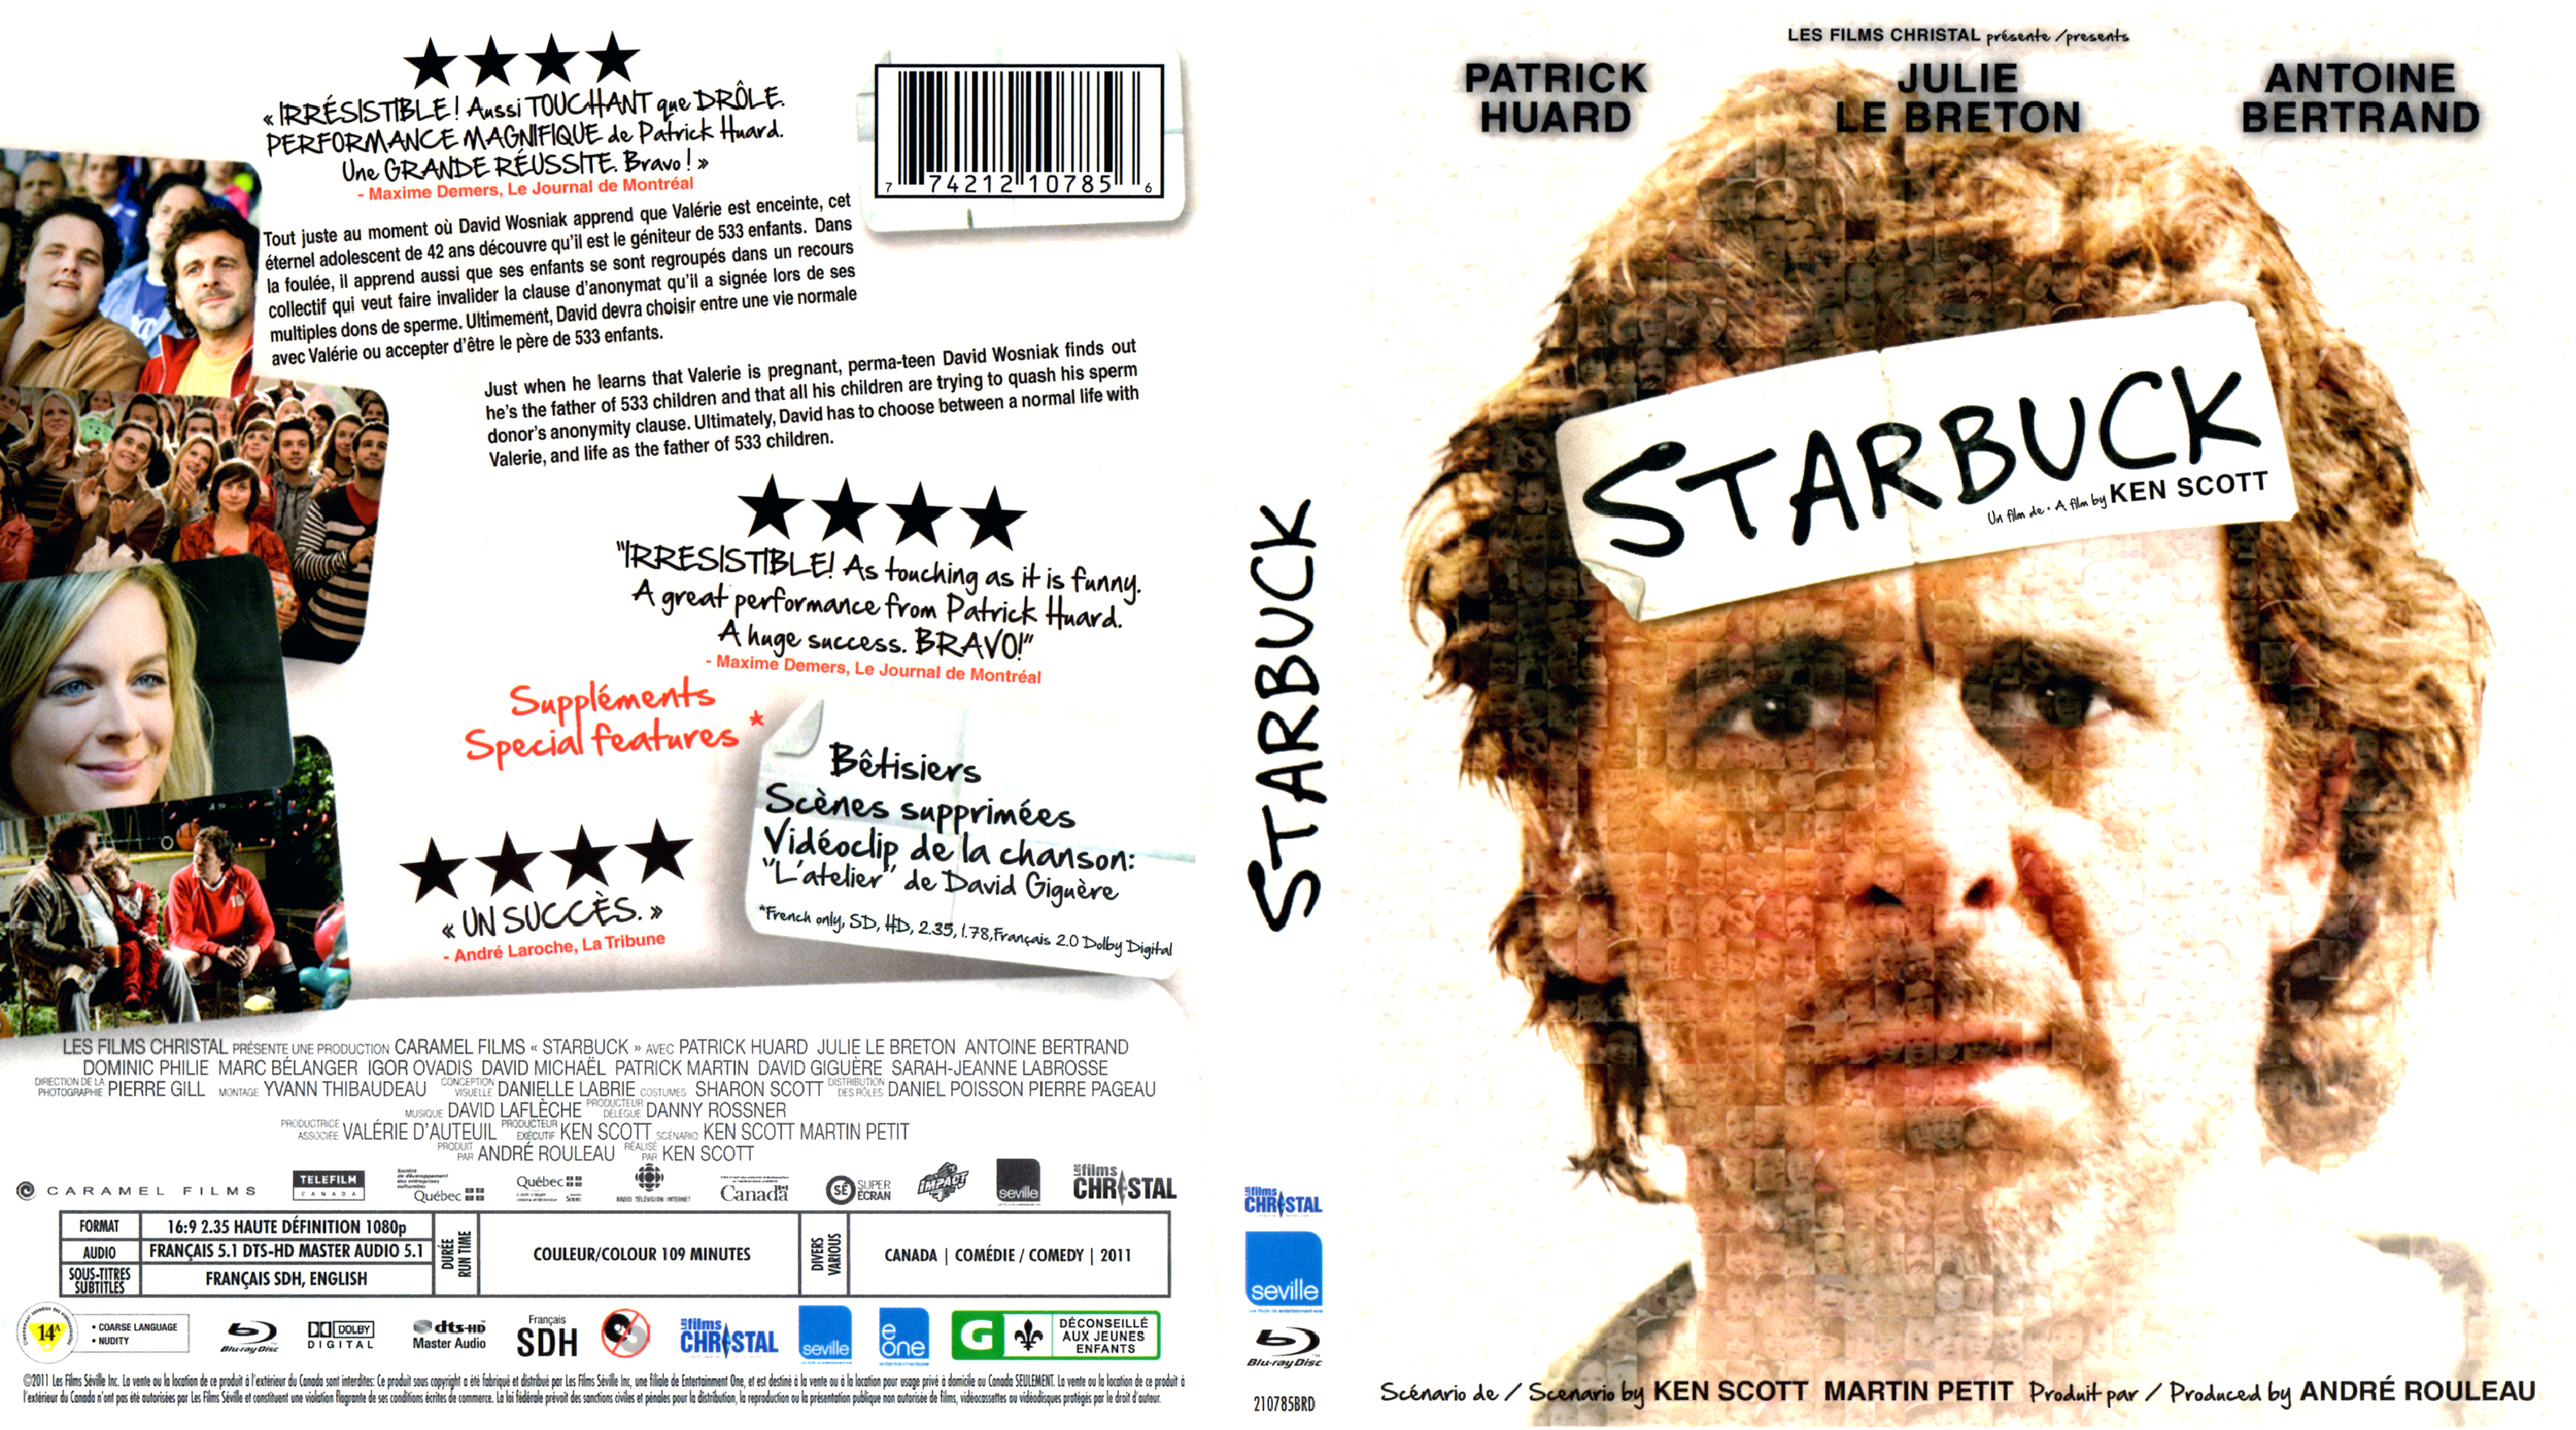 Jaquette DVD Starbuck (Canadienne) (BLU-RAY)